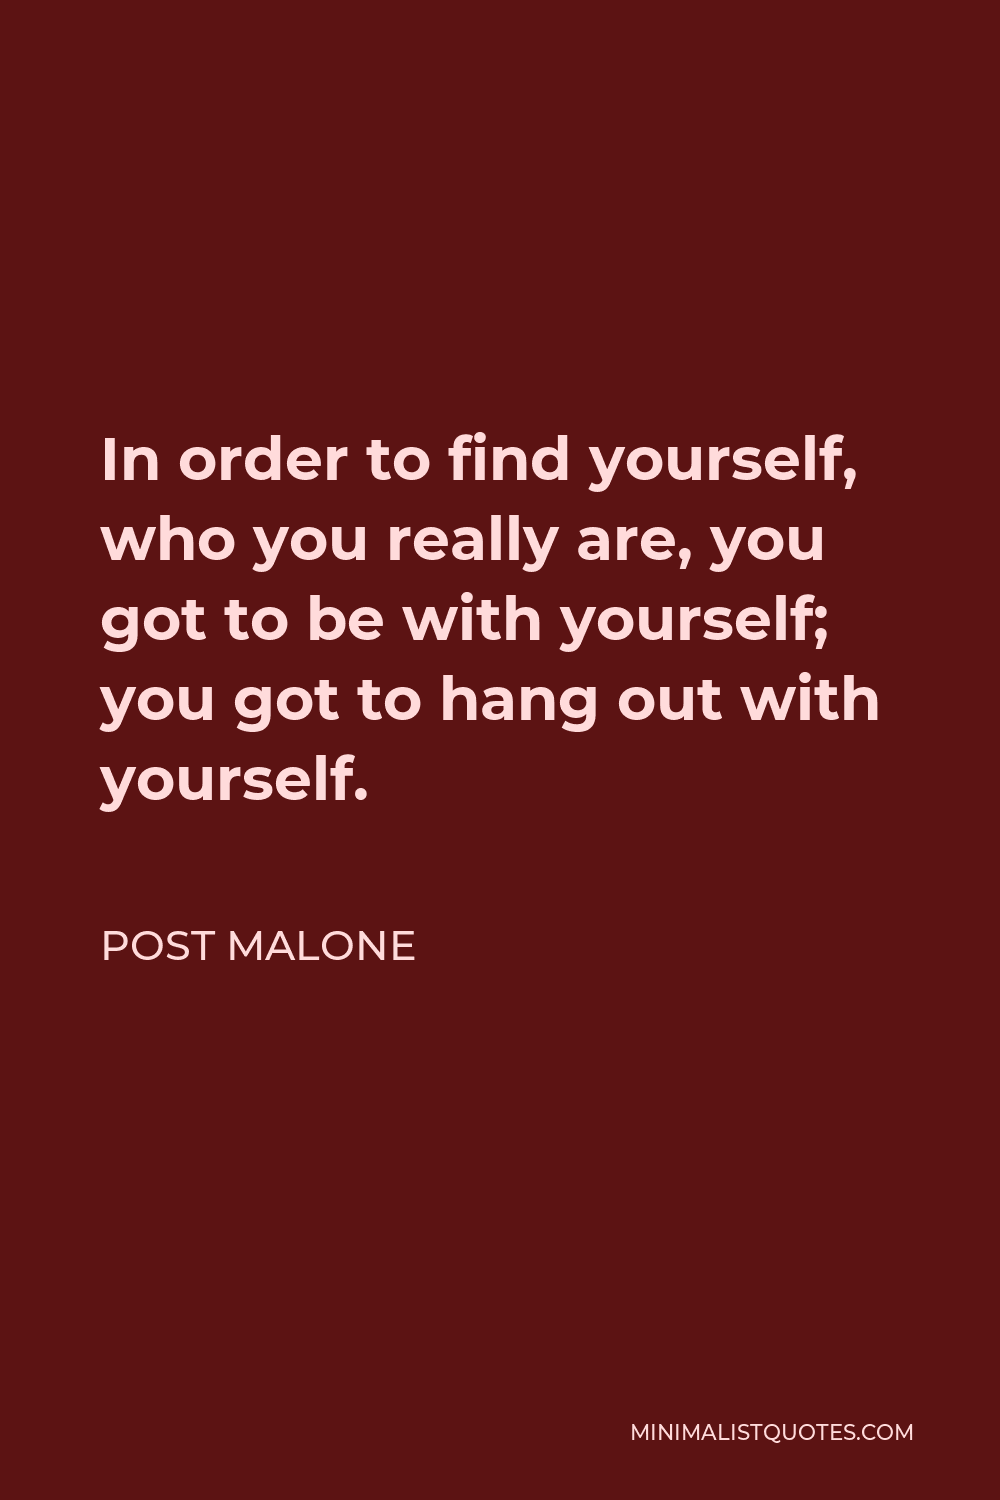 Post Malone Quote: In order to find yourself, who you really are, you got  to be with yourself; you got to hang out with yourself.